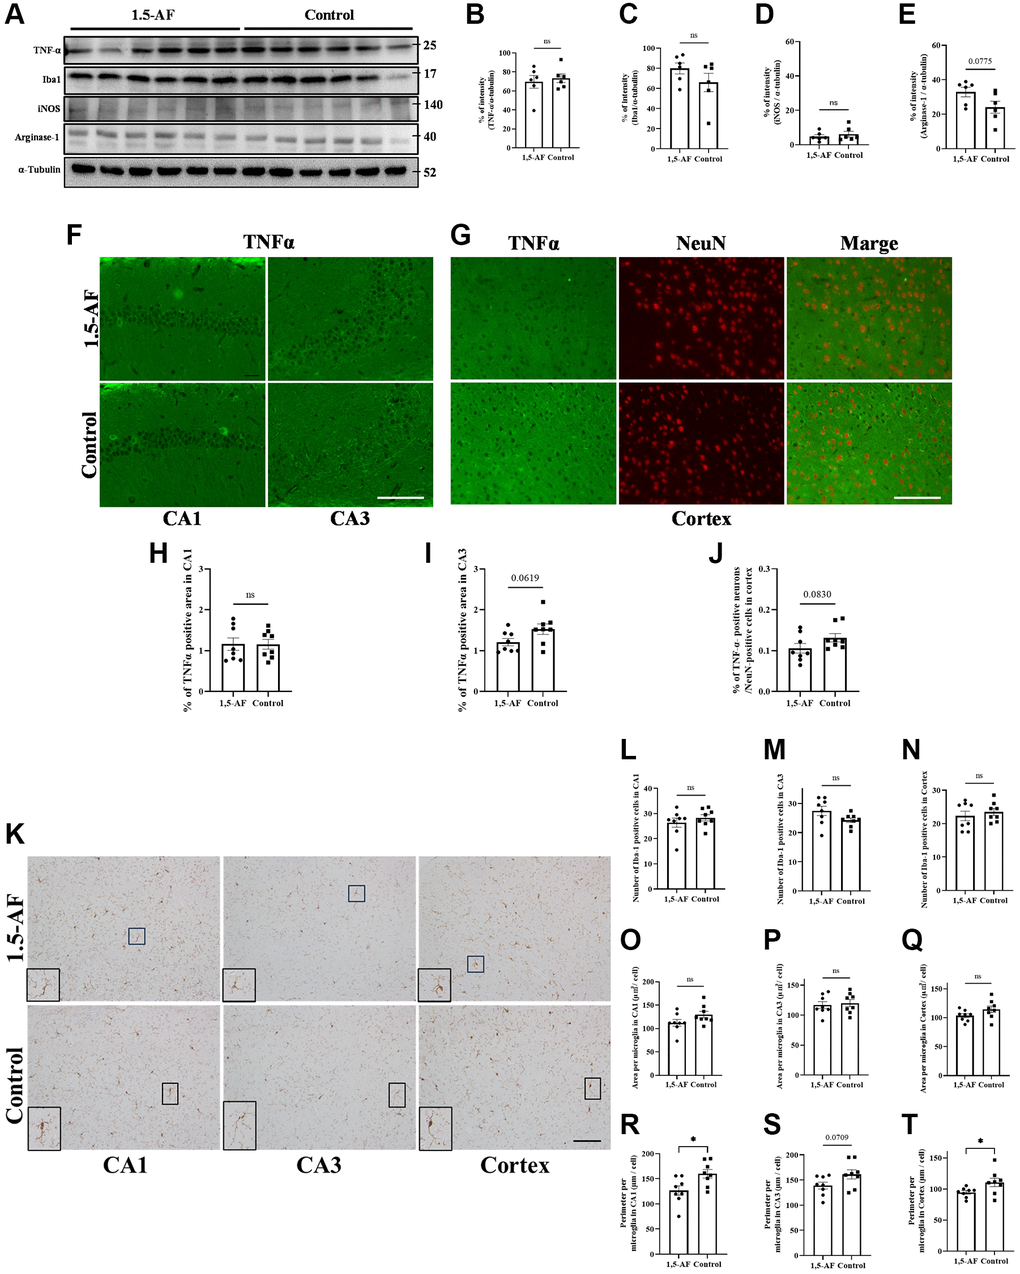 Effect of 1.5-AF on brain inflammation in SAMP8 mice. Immunoblot analysis (A) revealed that protein levels of TNF-α (B), Iba1 (C), iNOS (D), and arginase-1 (E) were not significantly different between 1,5-AF and control mice (1,5-AF: n = 6, control: n = 6). TNF-α staining in the hippocampal CA1 and CA3 regions (F). Co-stained images of NeuN (neurons; red) and TNF-α (green) in the Cortex (G). In all regions, TNF-α expression did not differ significantly between the two groups (H–J) (1,5-AF: n = 6, control: n = 6). Similarly, when analyzing the Iba1 staining of the cortex and hippocampal CA1 and CA3 regions (K); the number (L–N), and cell size (O–Q) of Iba1-positive microglia did not significantly differ between 1,5-AF and control mice. In contrast, microglial perimeters (PE) were significantly smaller in CA1 (R), unchanged in CA3 (S), and smaller in Cortex (T) at 1,5-AF mice compared to Control mice. (1,5-AF: n = 6, control: n = 6). Data are shown as the mean ± standard error. *p F, G, K). Abbreviations: 1,5-AF: 1,5-anhydro-D-fructose; Iba1: allograft inflammatory factor 1; iNOS: inducible nitric oxide synthase; SAMP8: senescence-accelerated mouse-prone 8; TNF-α: tumor necrosis factor-α.